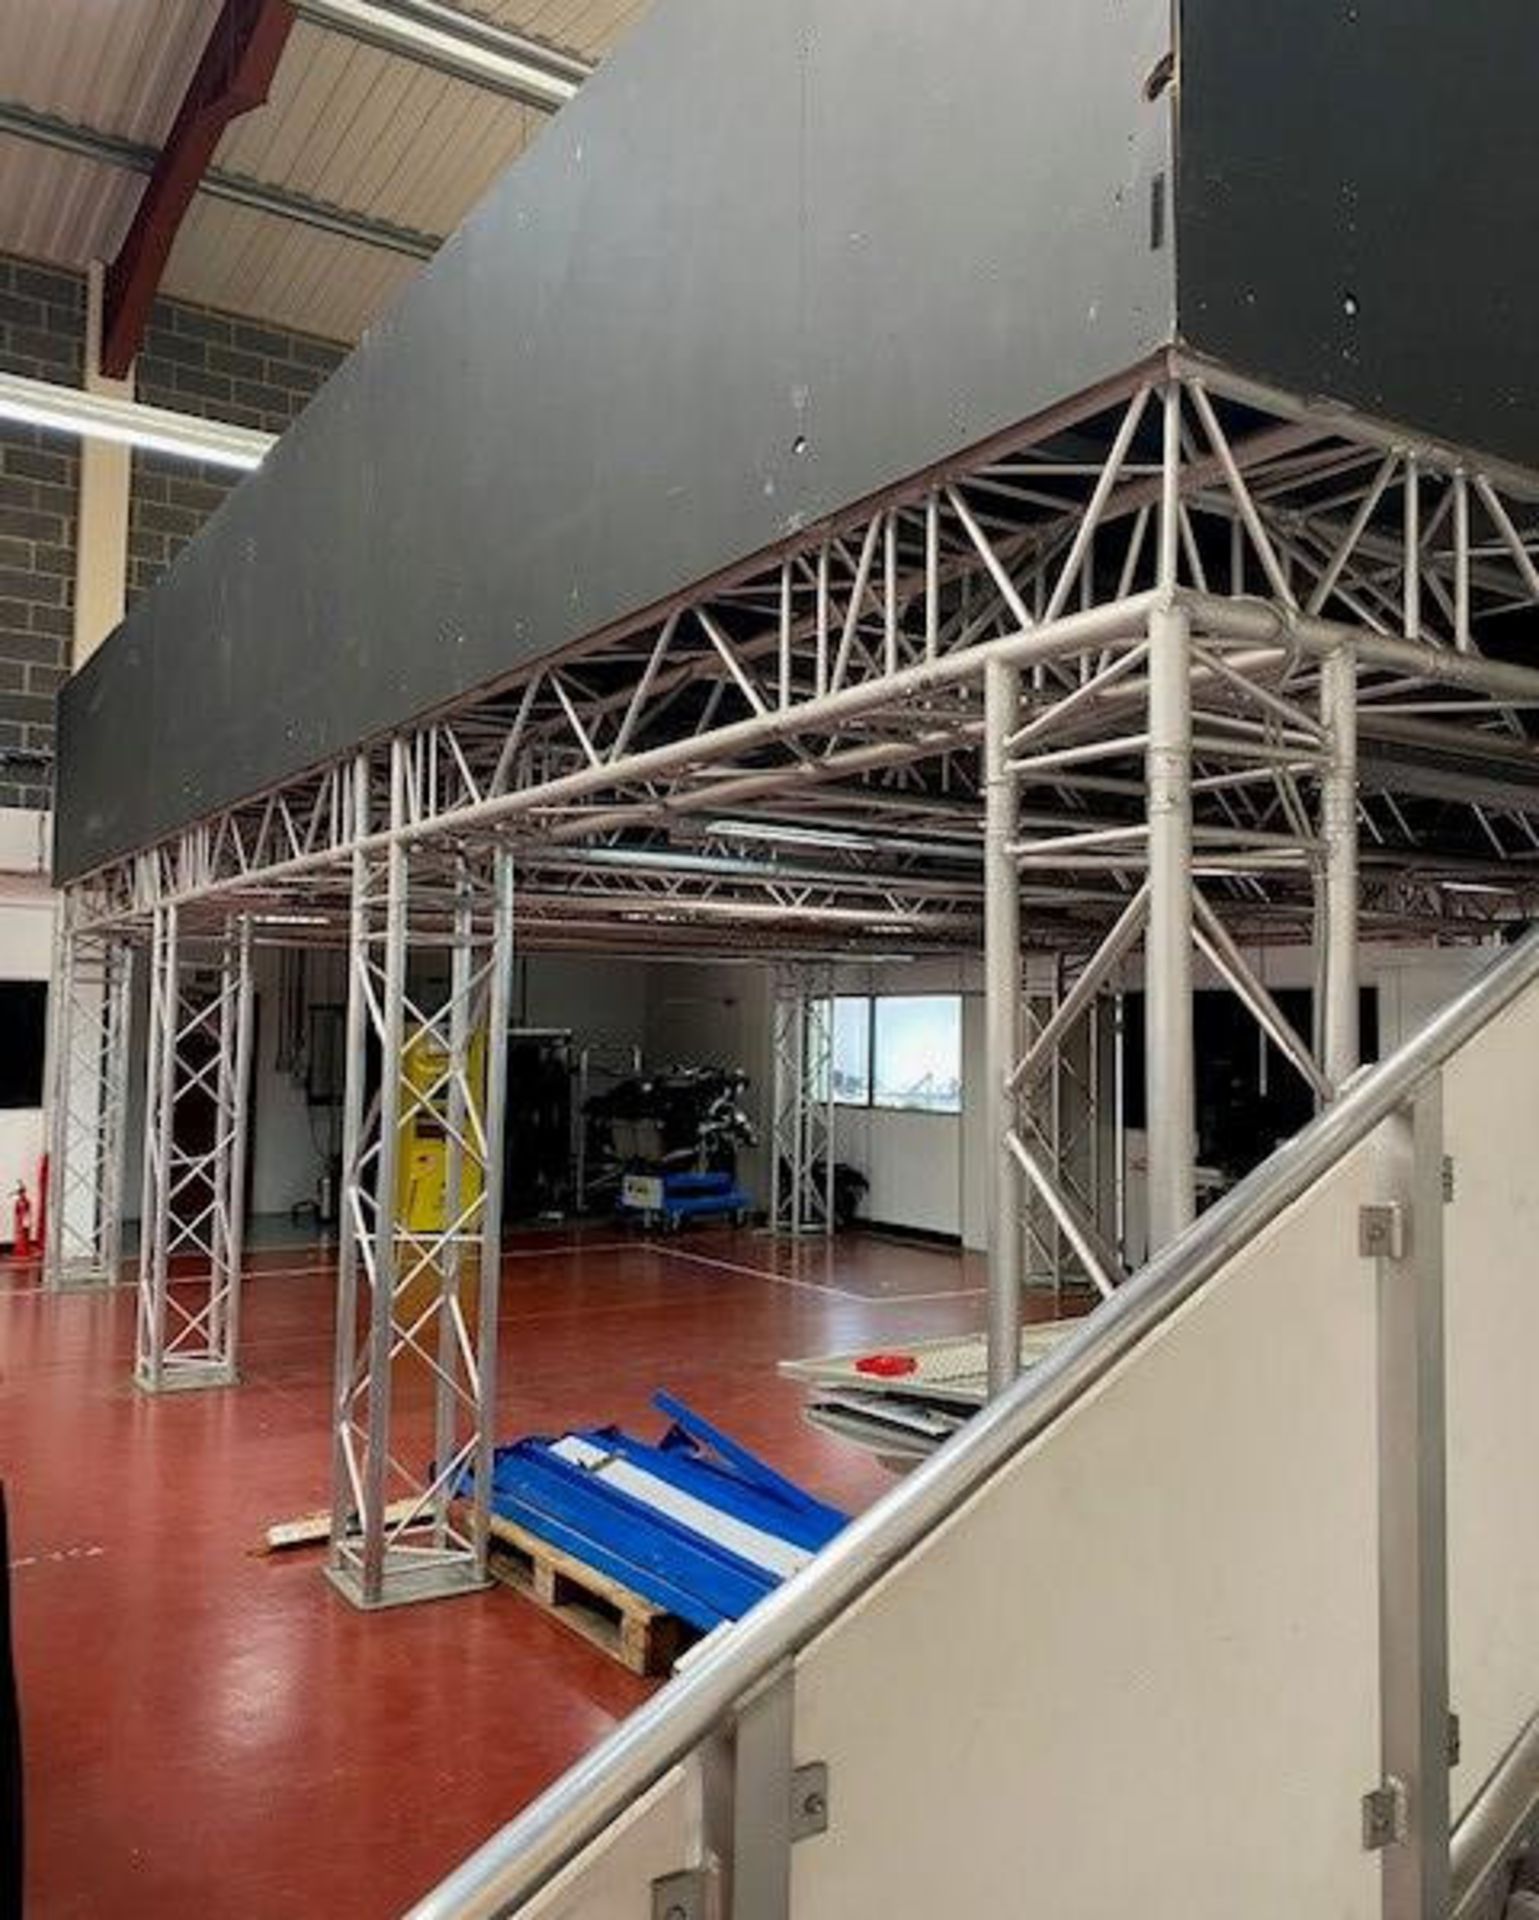 1 x 8m x 10m Truss Mezzanine with Staircase, Solid Floor And Ballustrade- CL548 - Location: Near - Image 2 of 10